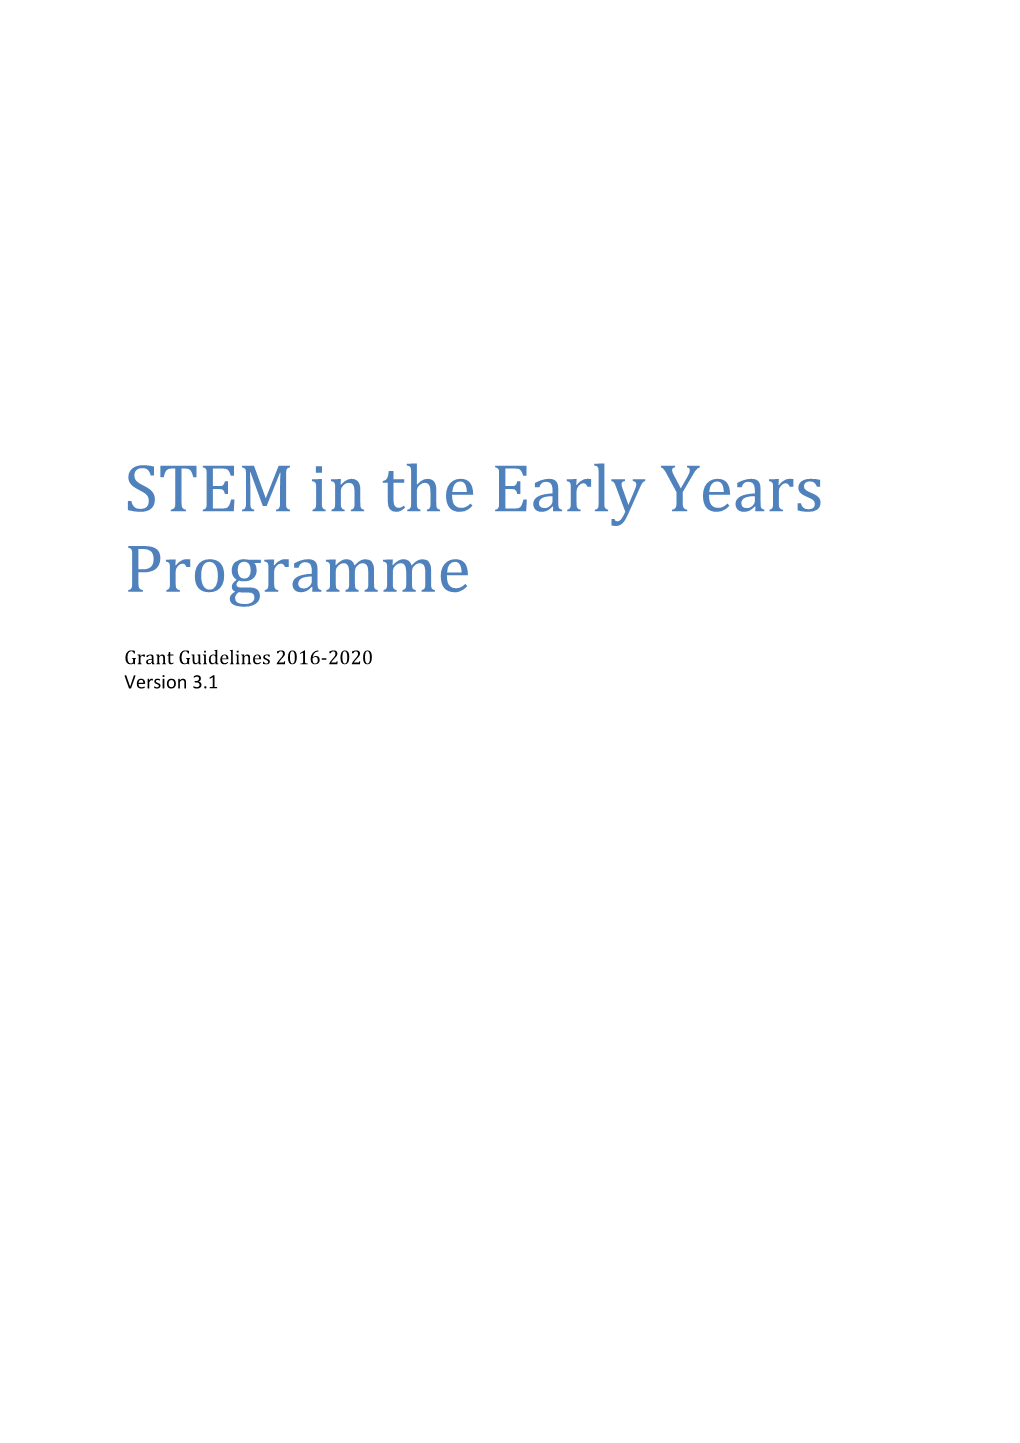 STEM in the Early Years Programme